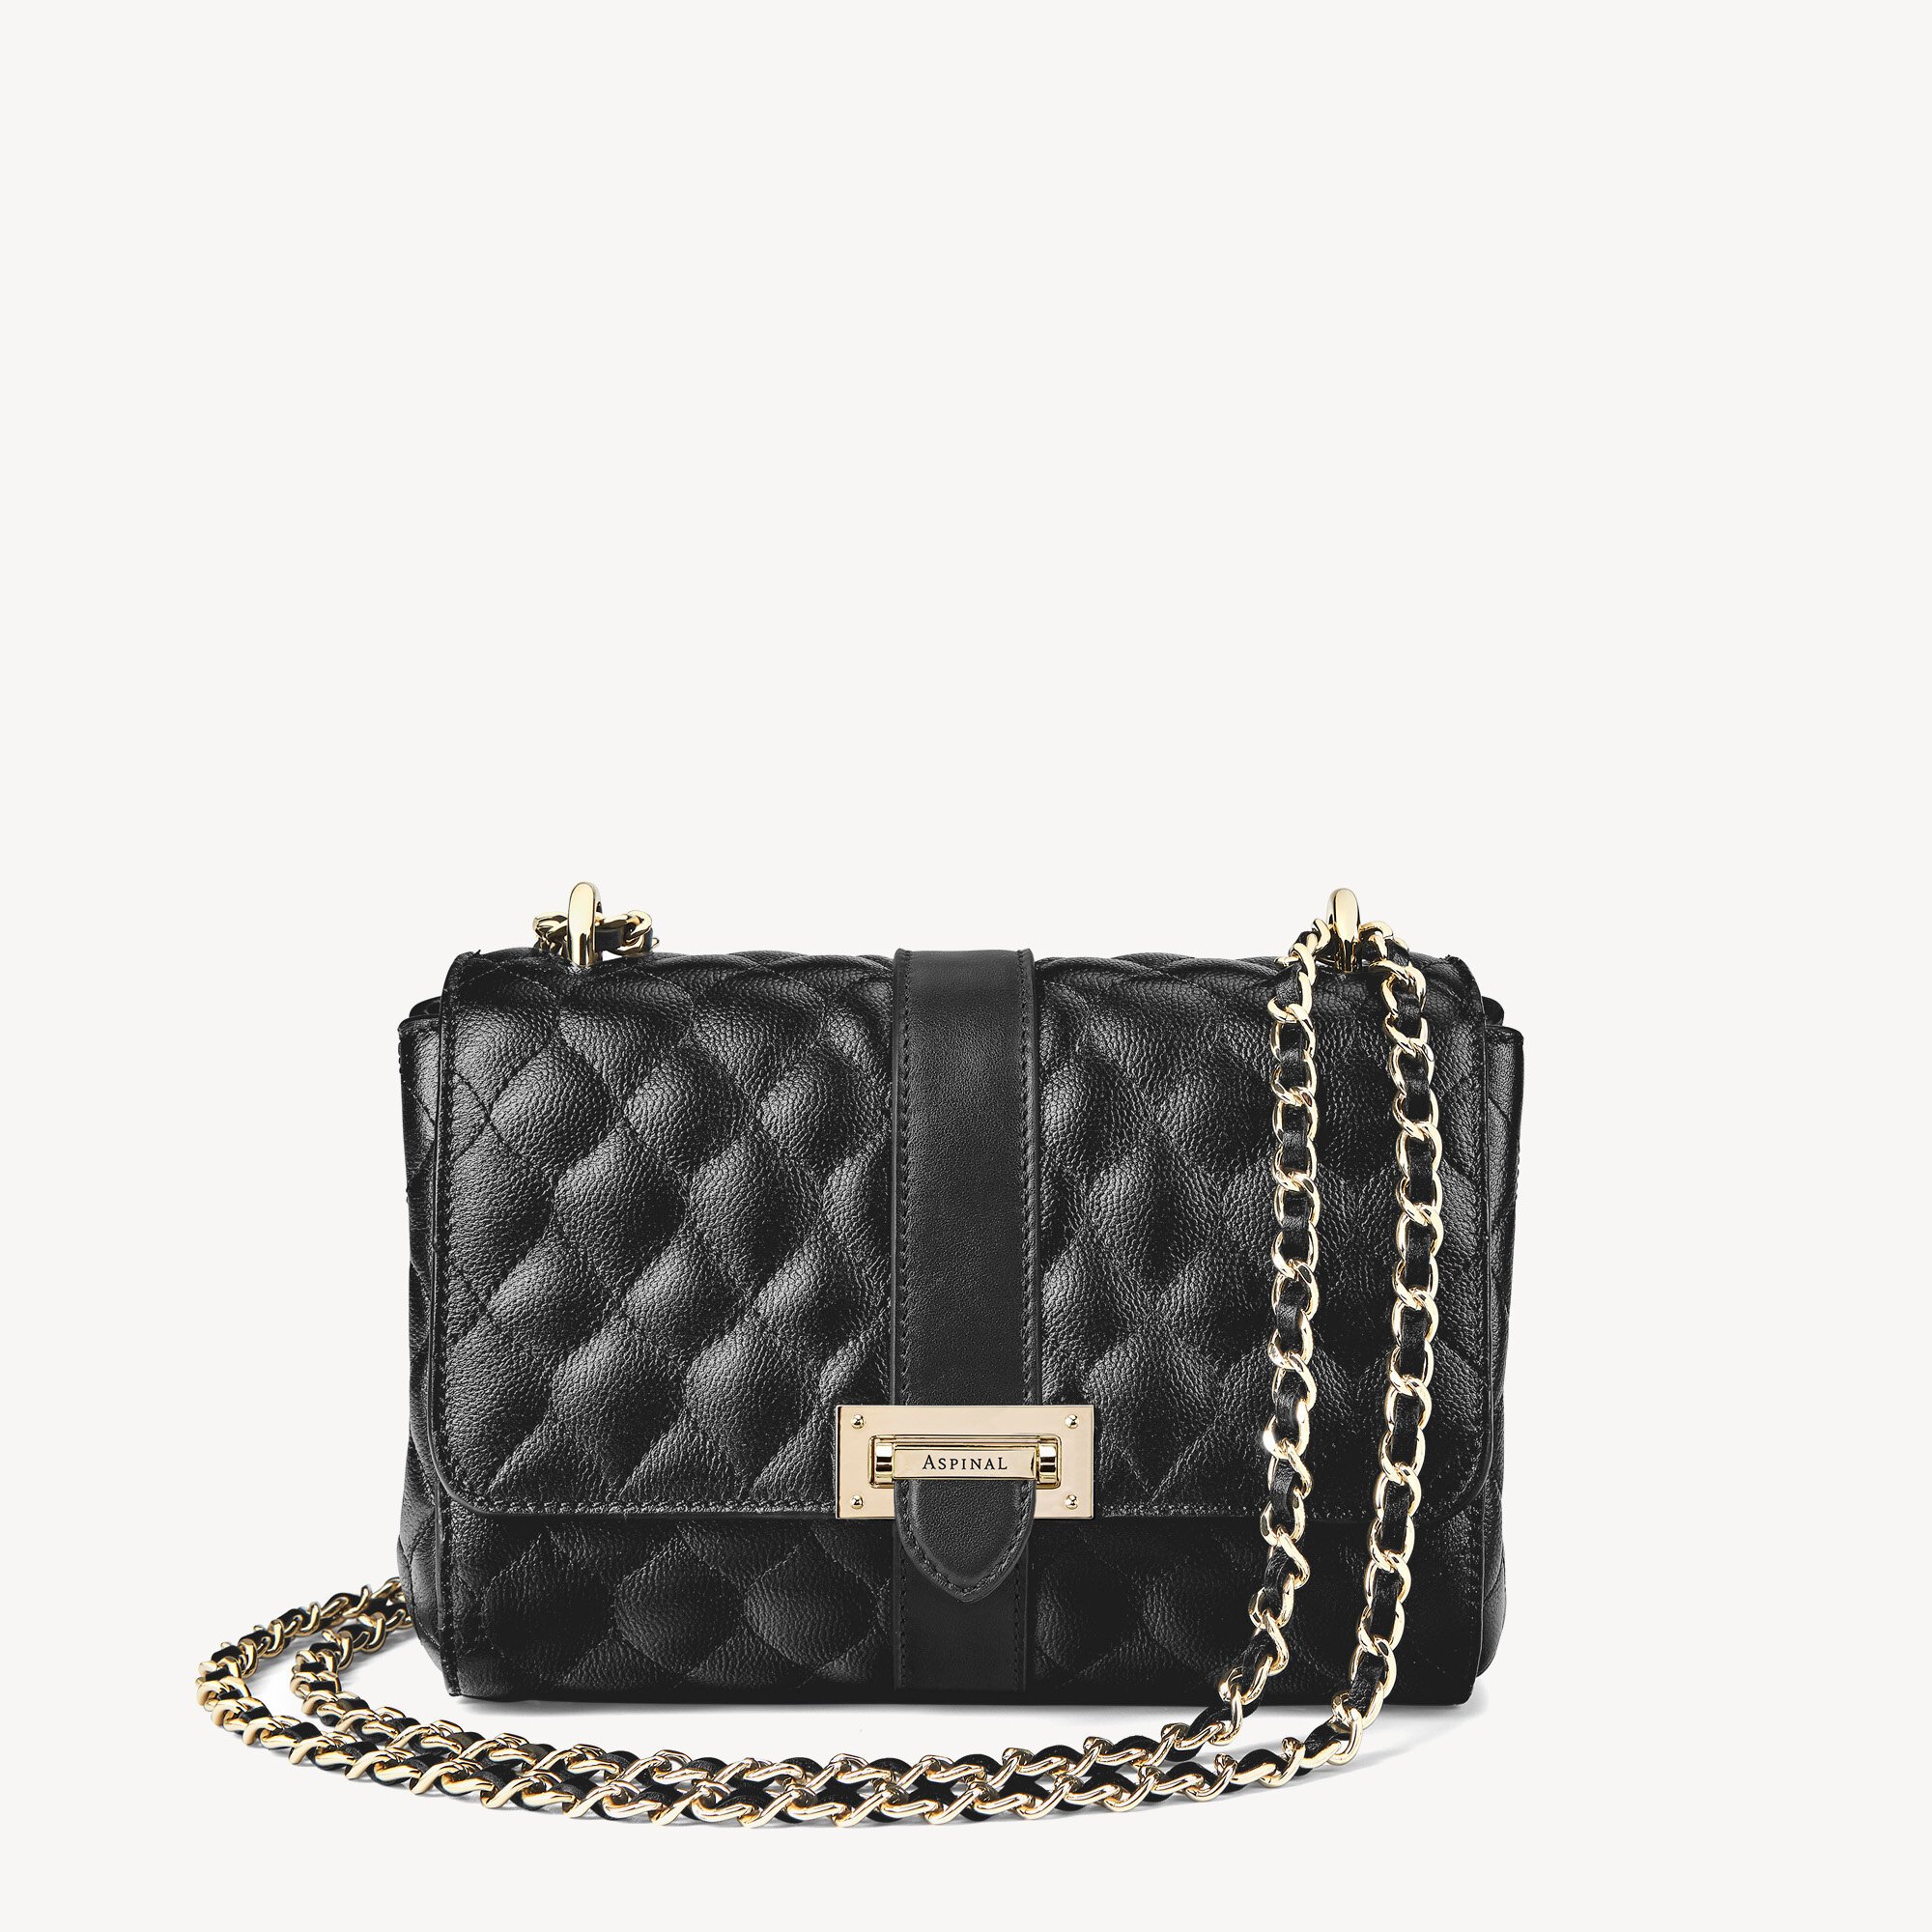 Aspinal of London Lottie Bag in Black Quilted Kaviar.jpg